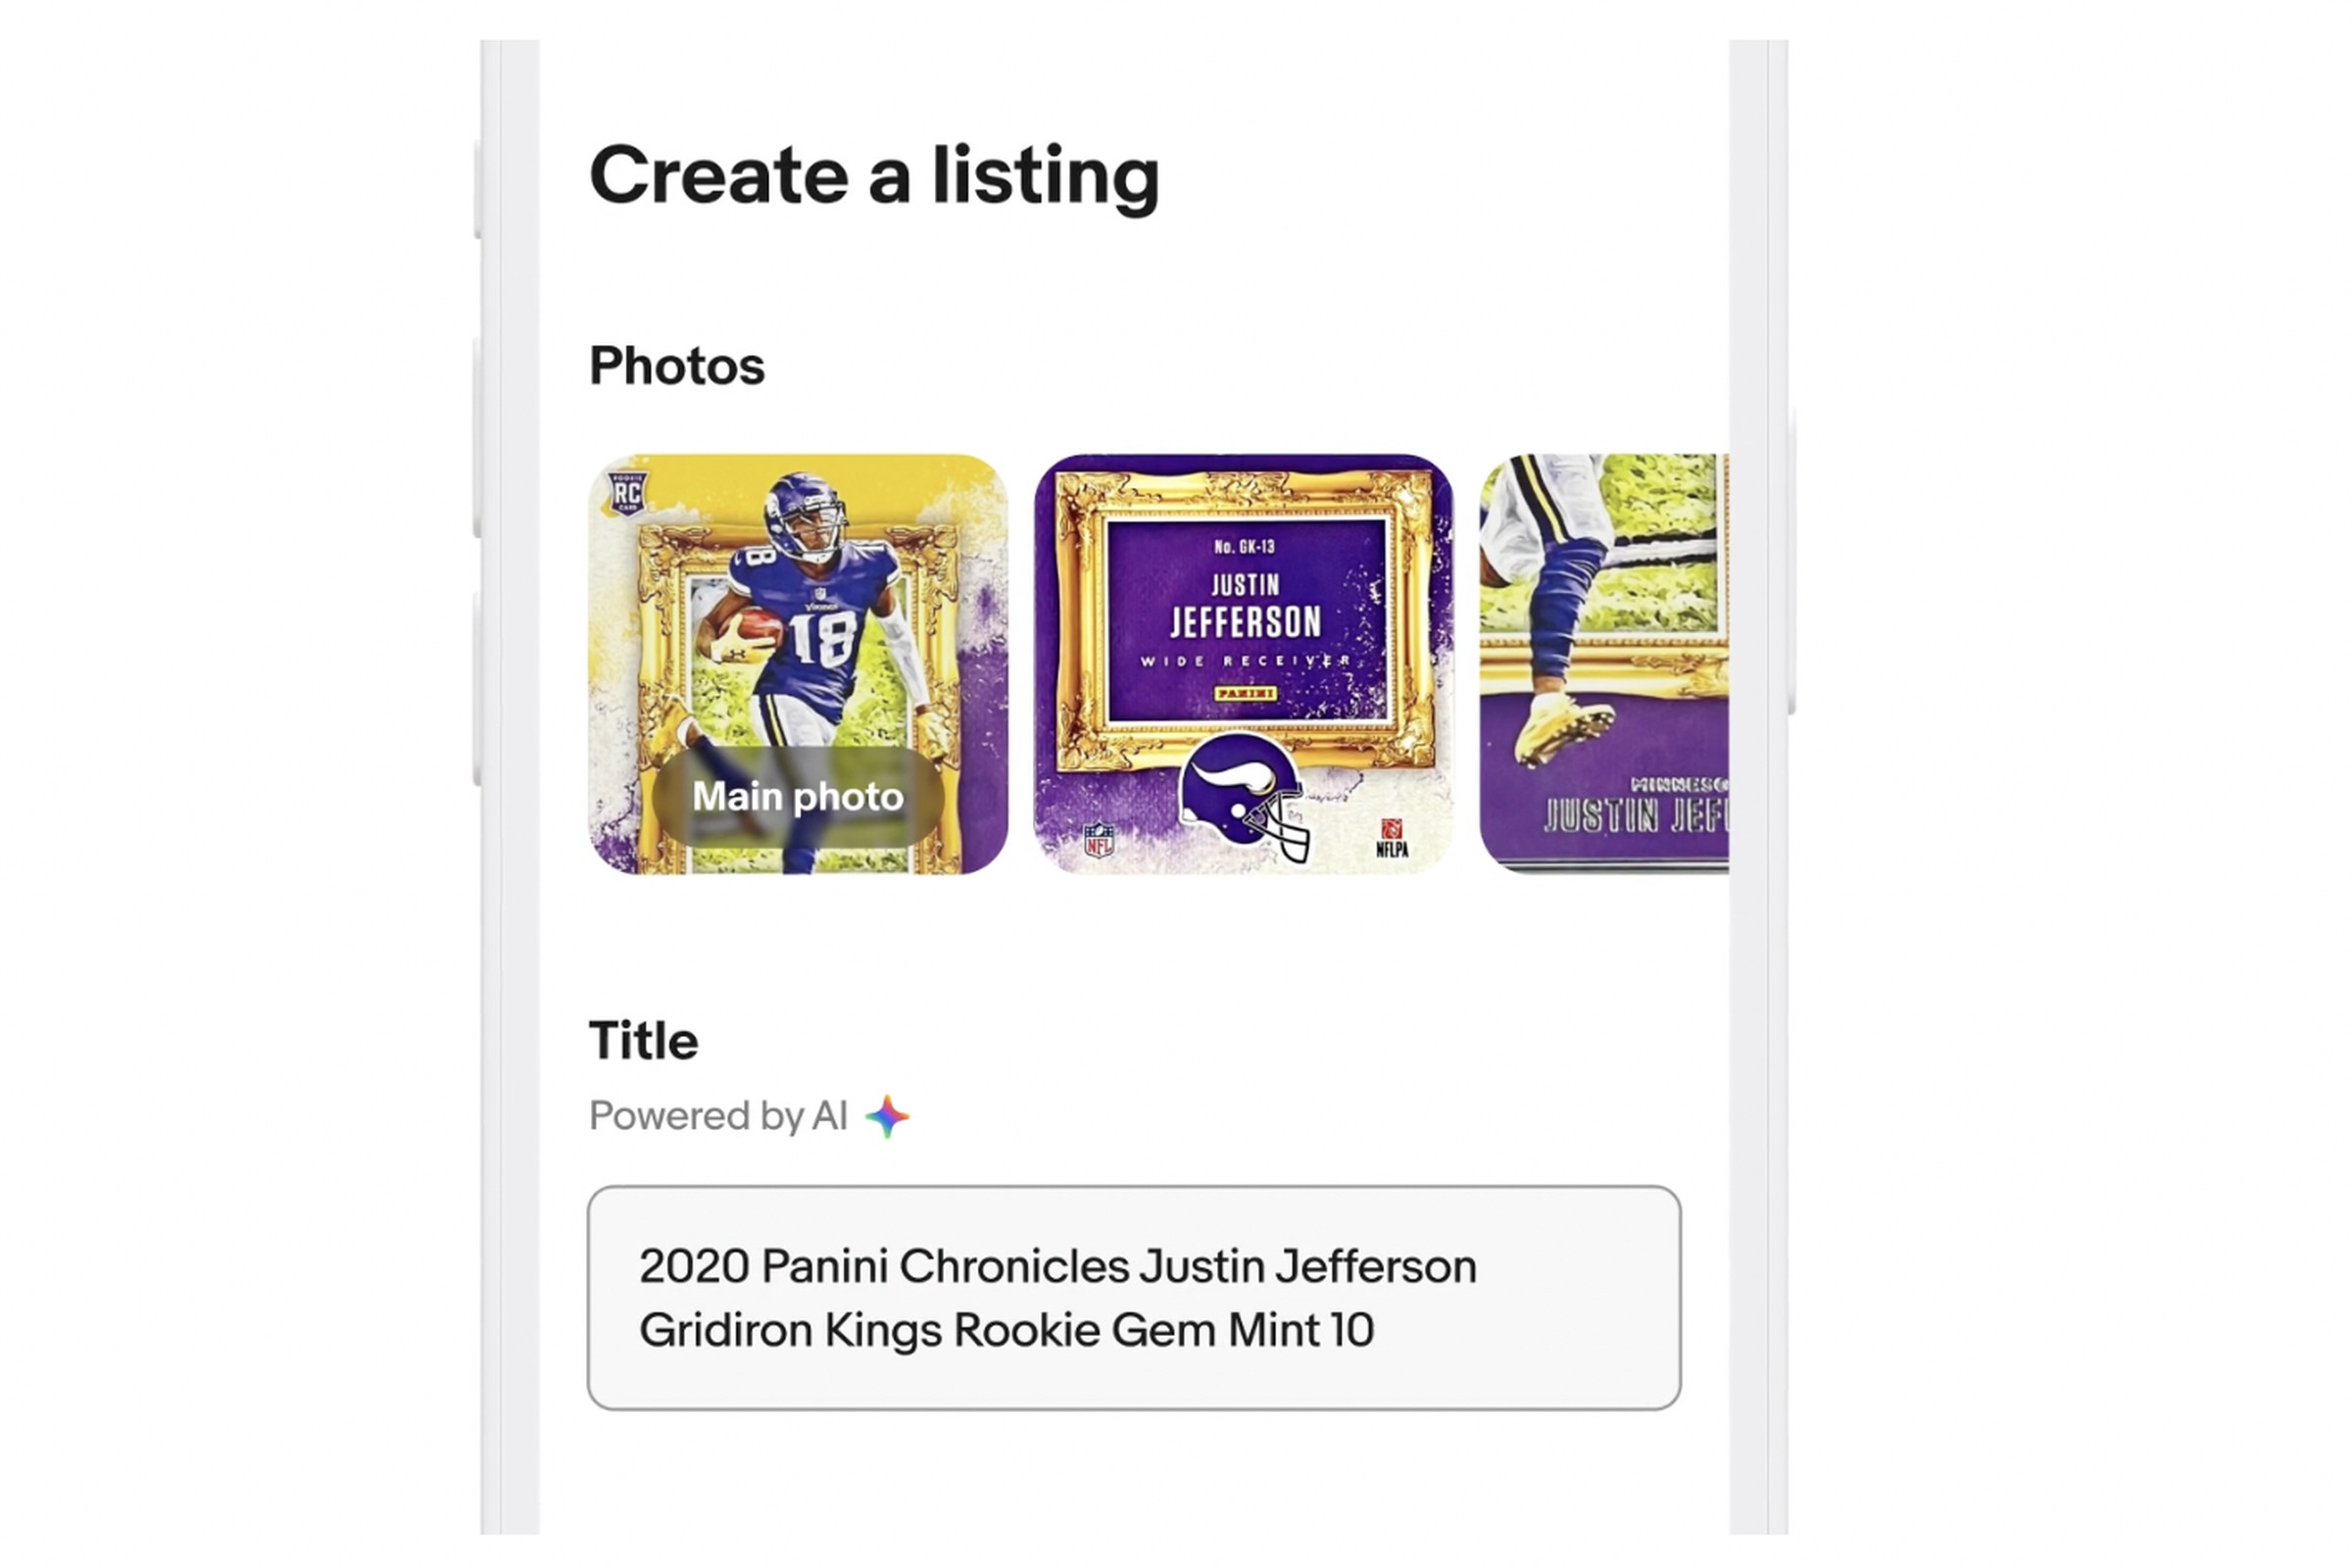 eBay’s AI-powered product listing tool uses uploaded images to fill in key information